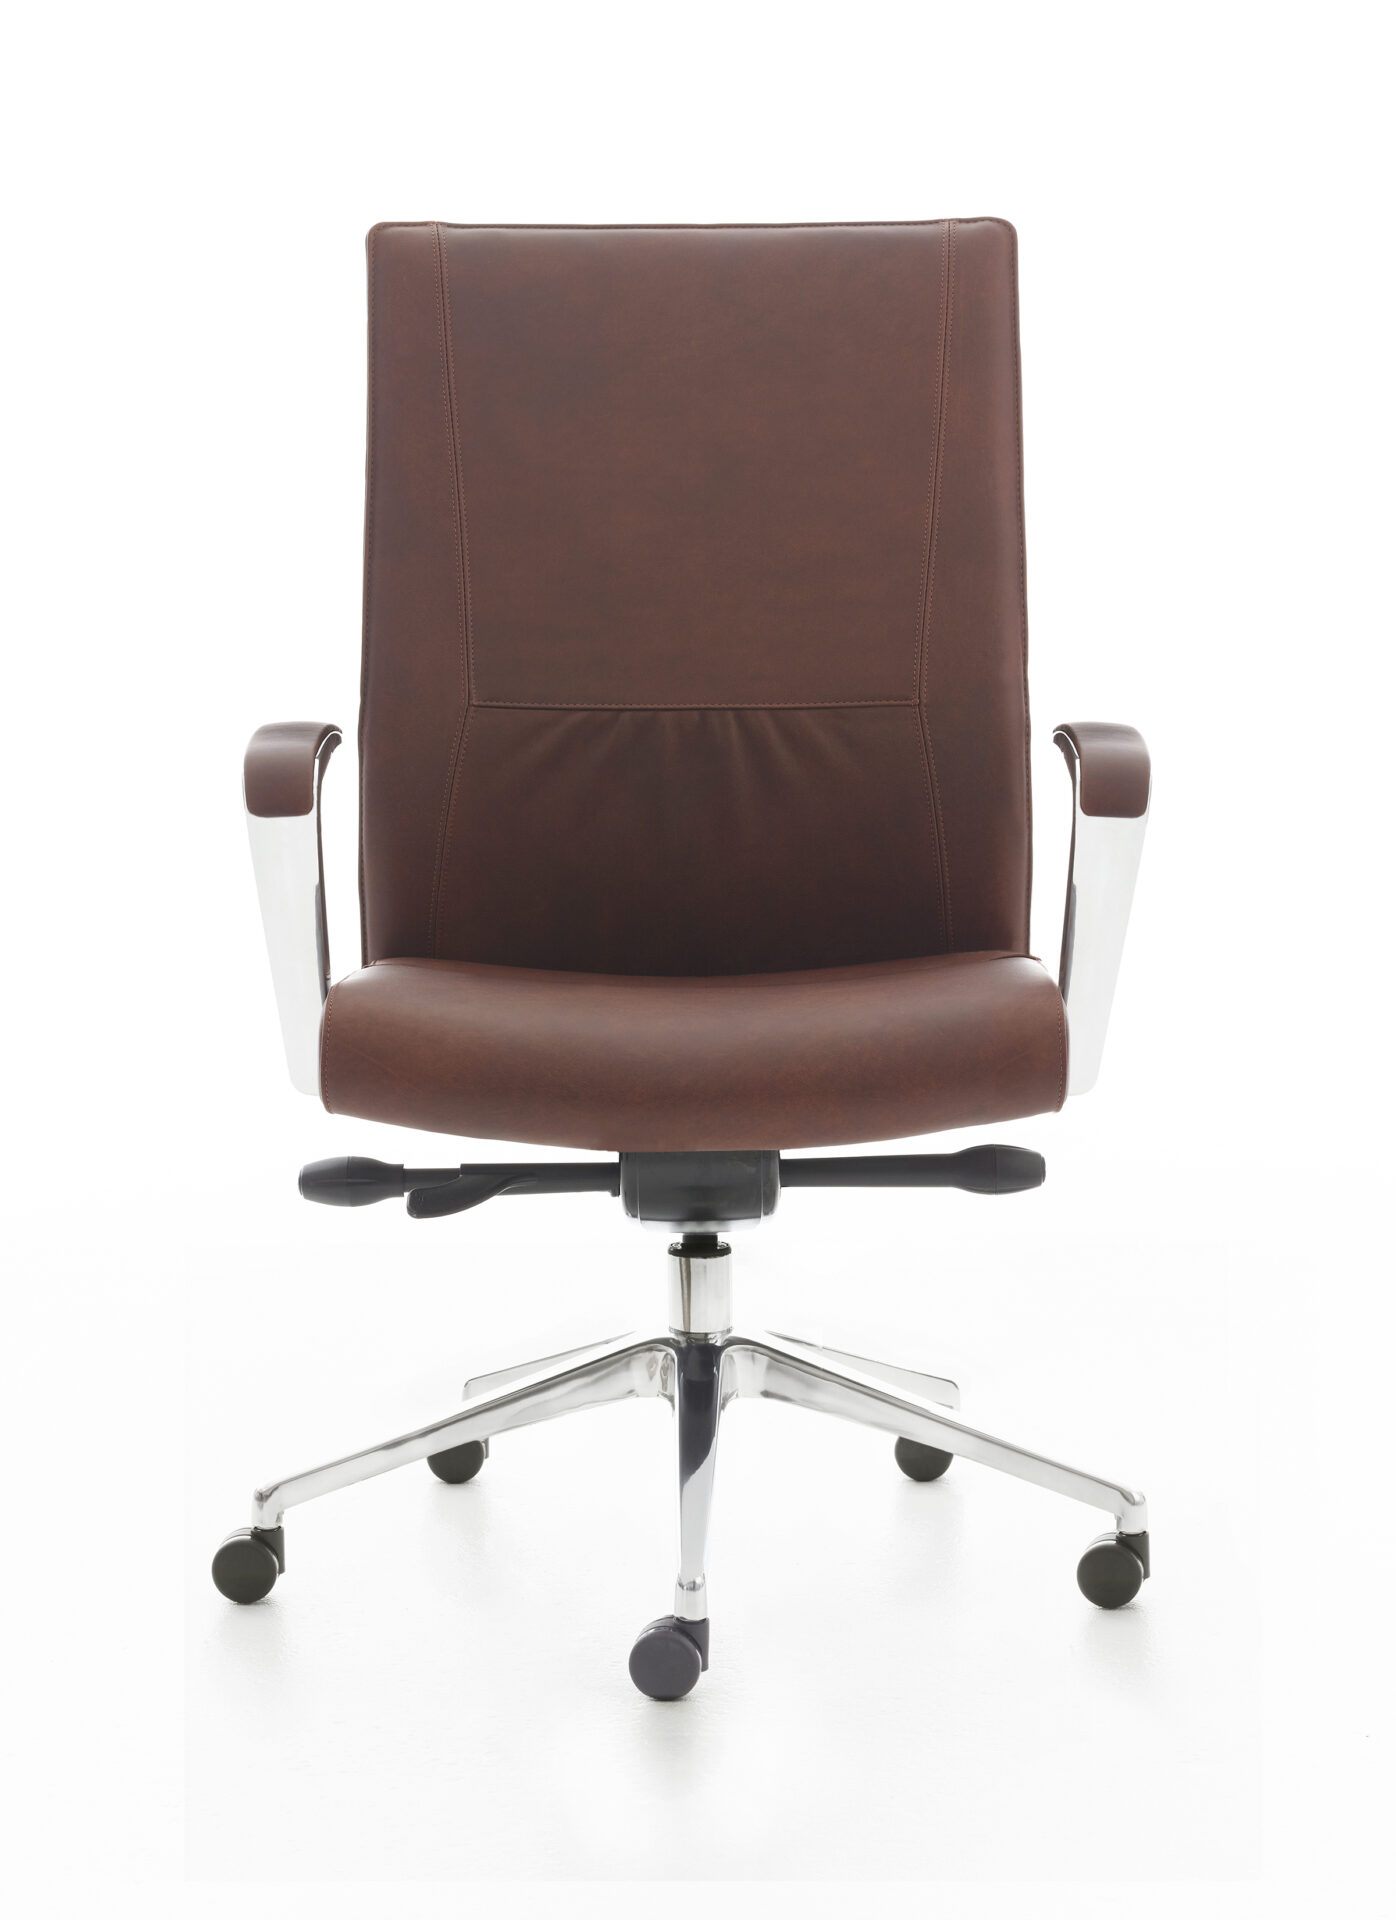 Stylex Insight Decora Conference Chair